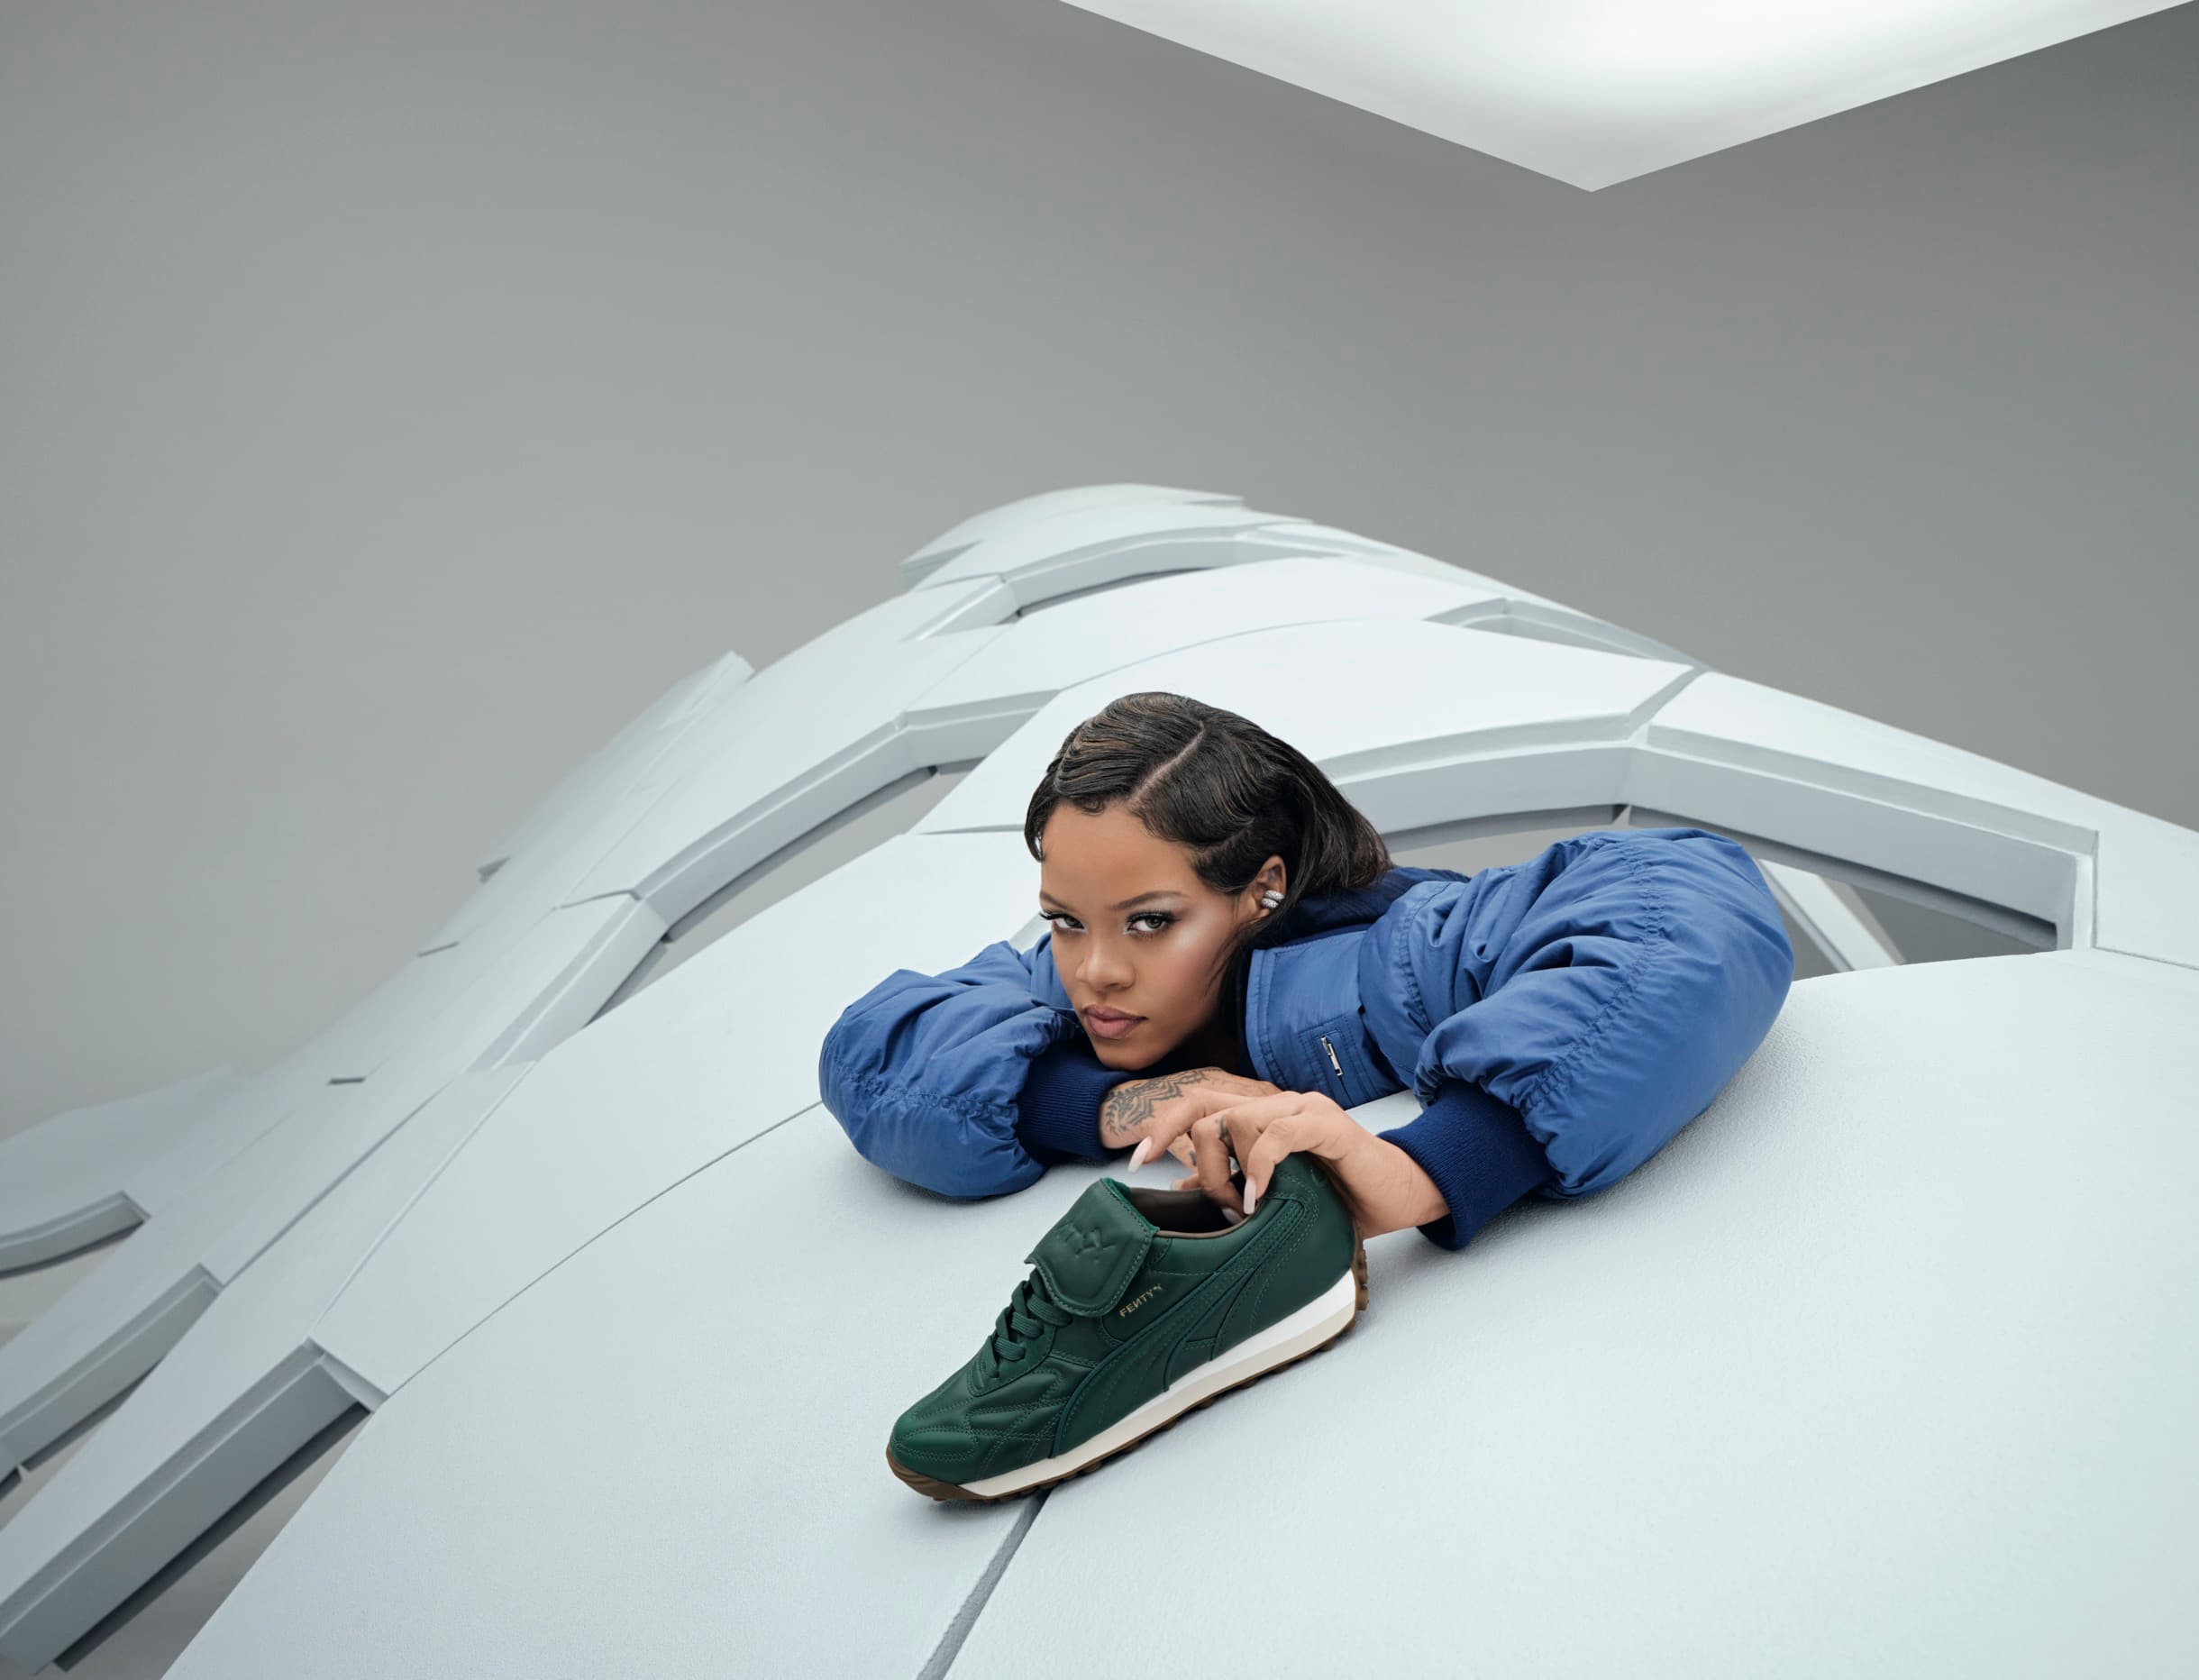 Rihanna lies on a geometric white structure in a blue jacket, presenting a green FENTY x PUMA sneaker to the camera.